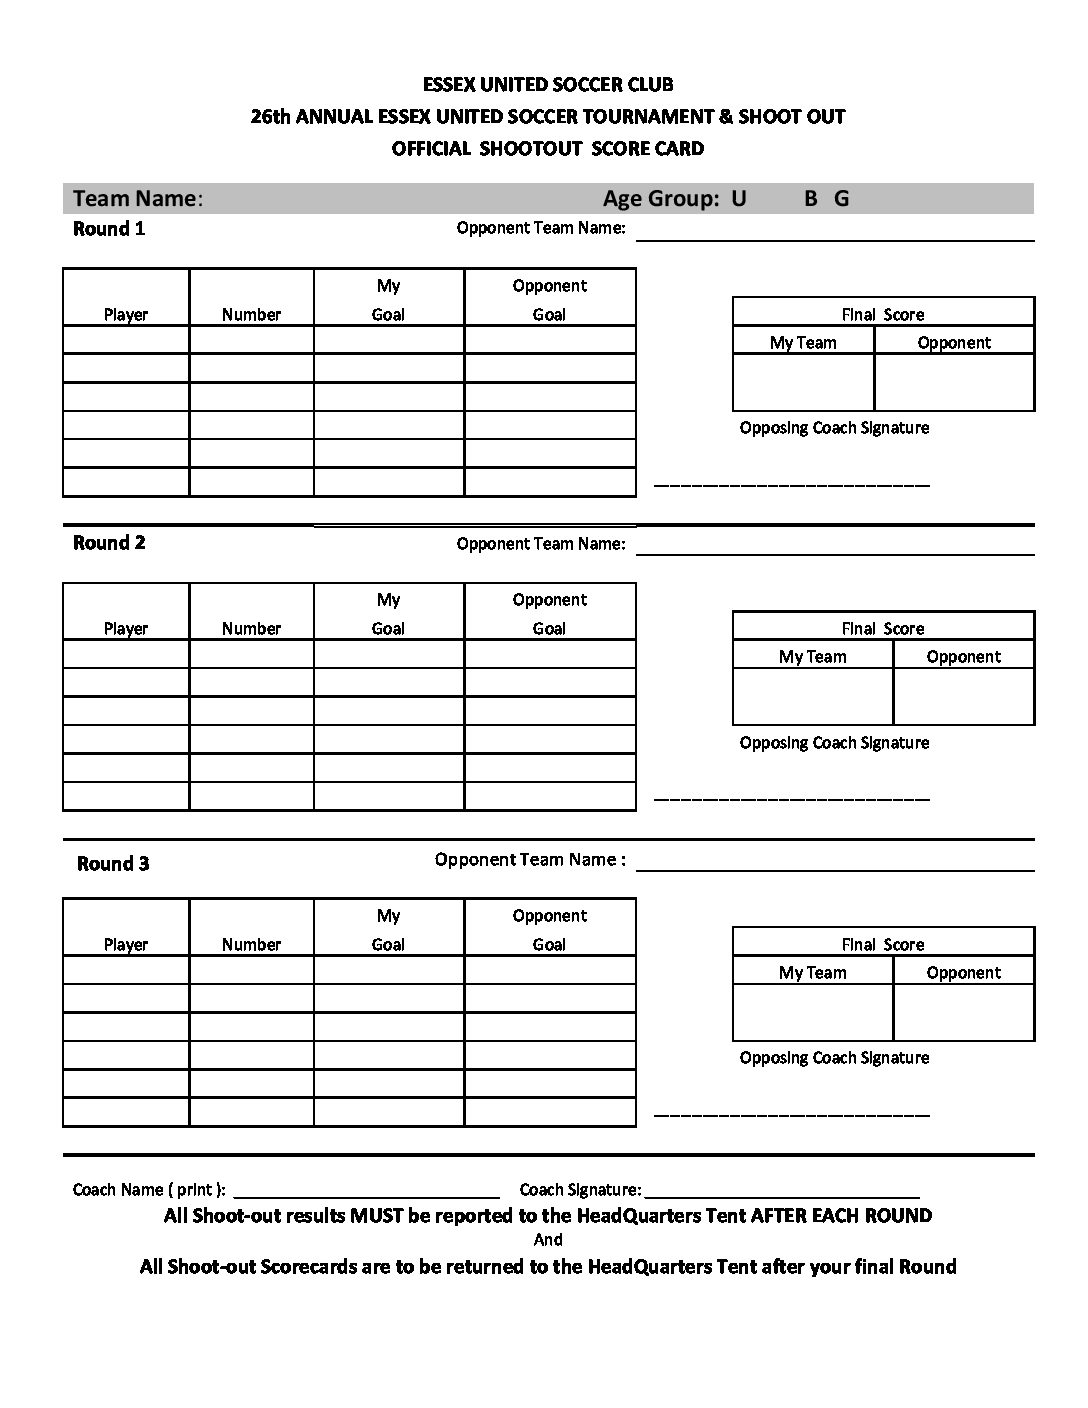 Click here to download a PDF of a Score Card.